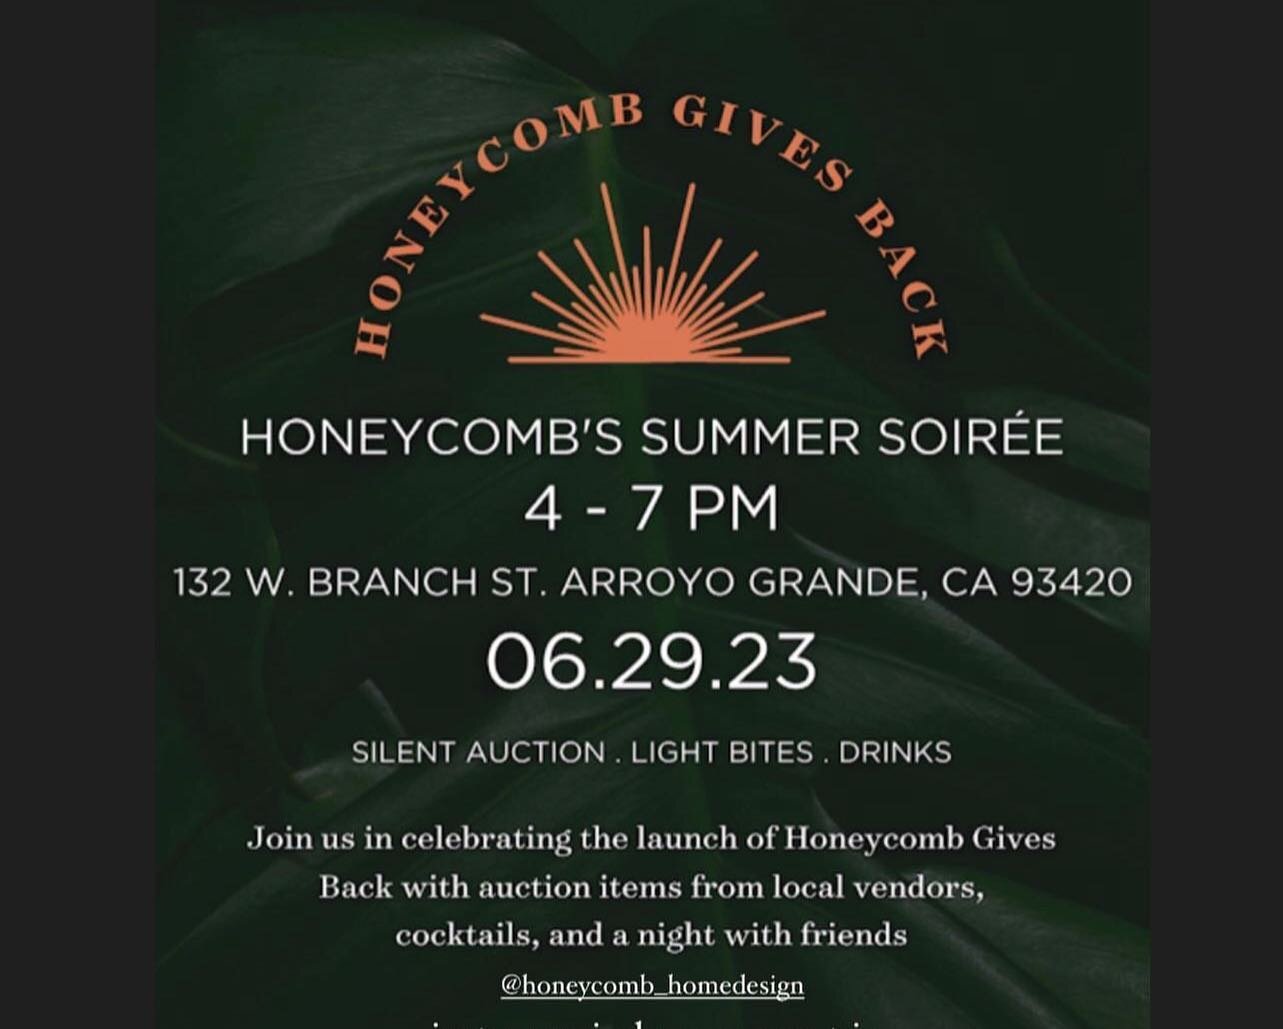 Don&rsquo;t miss Honeycomb&rsquo;s Summer Soir&eacute;e! Today from 4-7 pm! Lots of great silent auction items to bid on! All proceeds go to Honeycomb Gives Back to help with room makeovers for awesome kids!